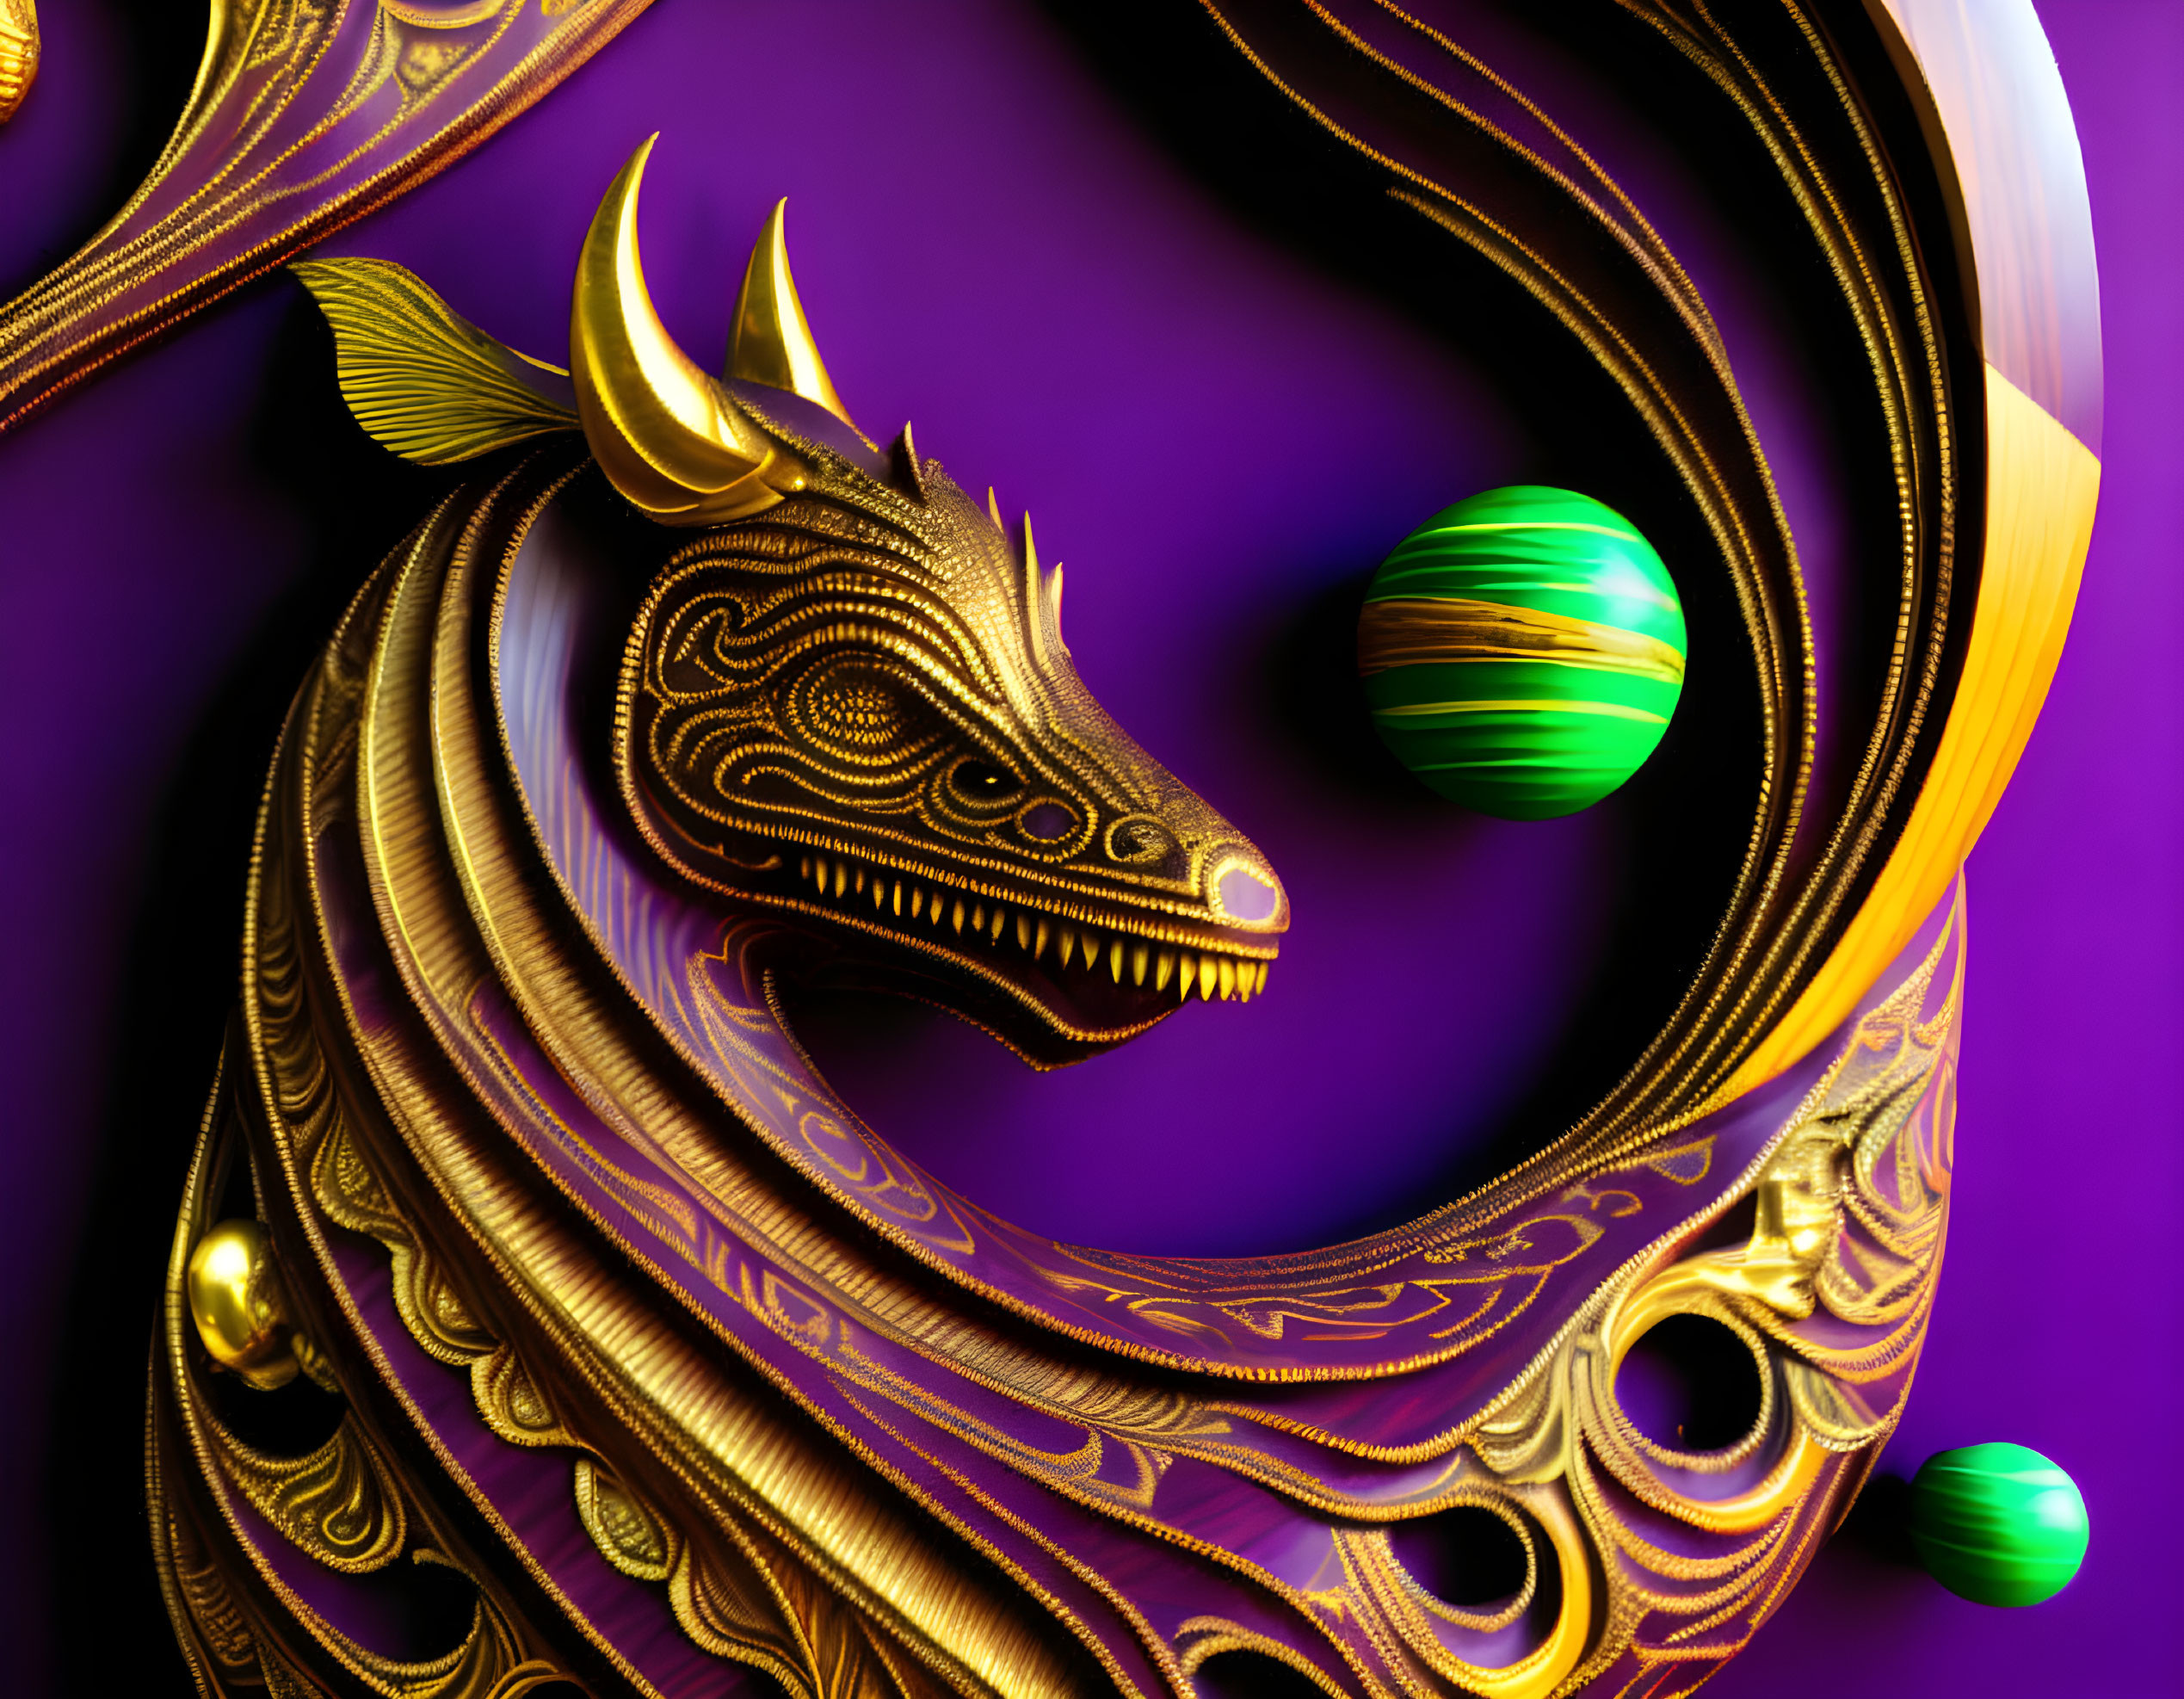 Intricate Golden Dragon Sculpture on Purple Background with Green Spheres